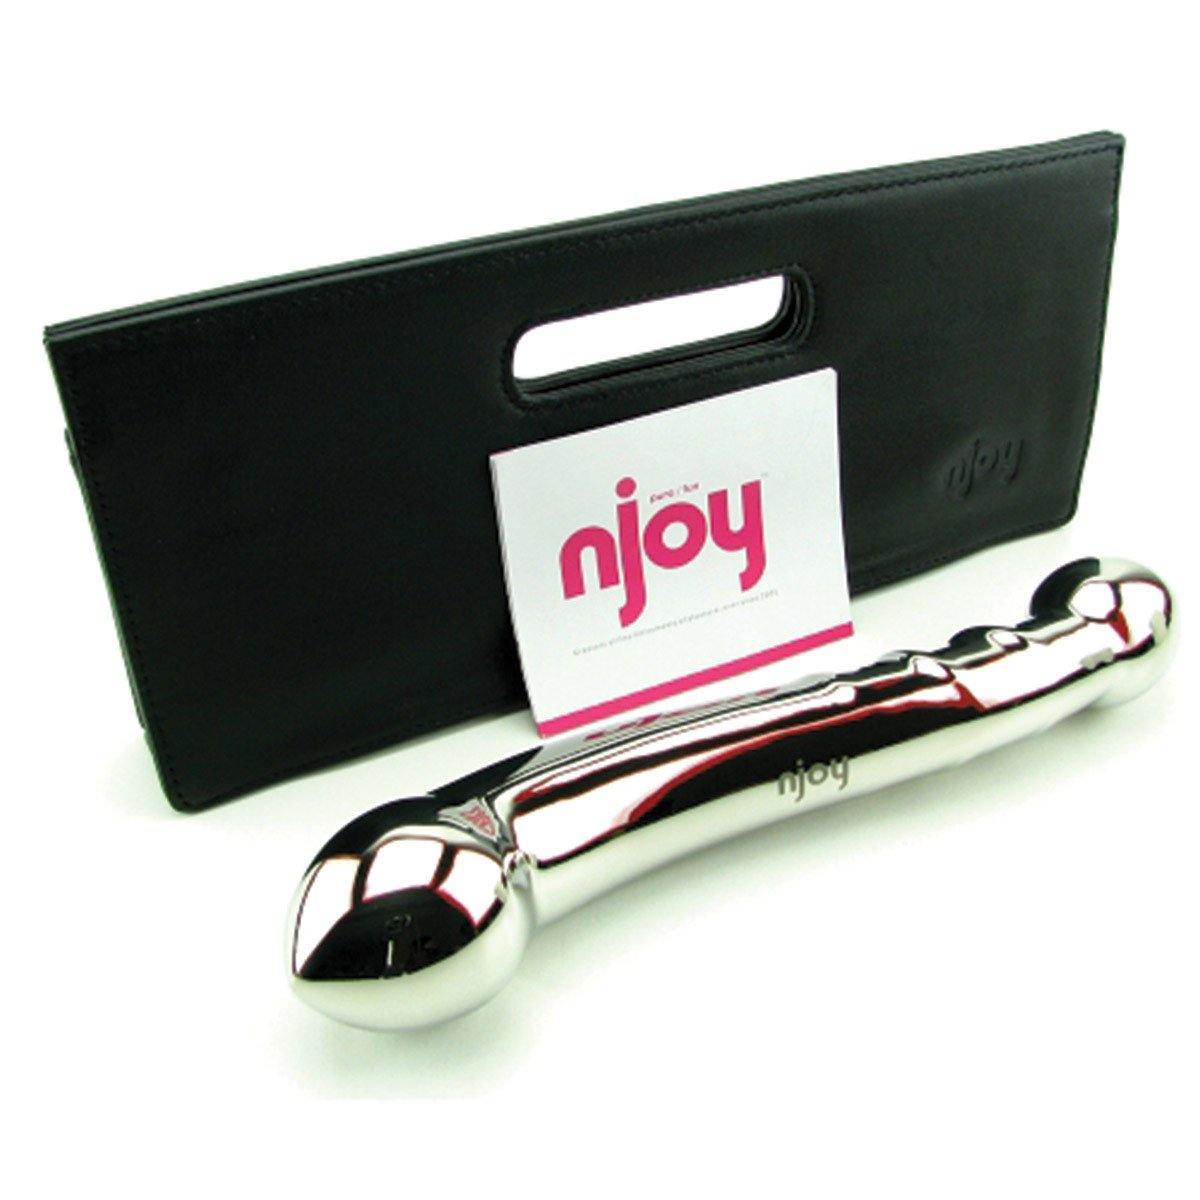 Njoy 11 - Buy At Luxury Toy X - Free 3-Day Shipping